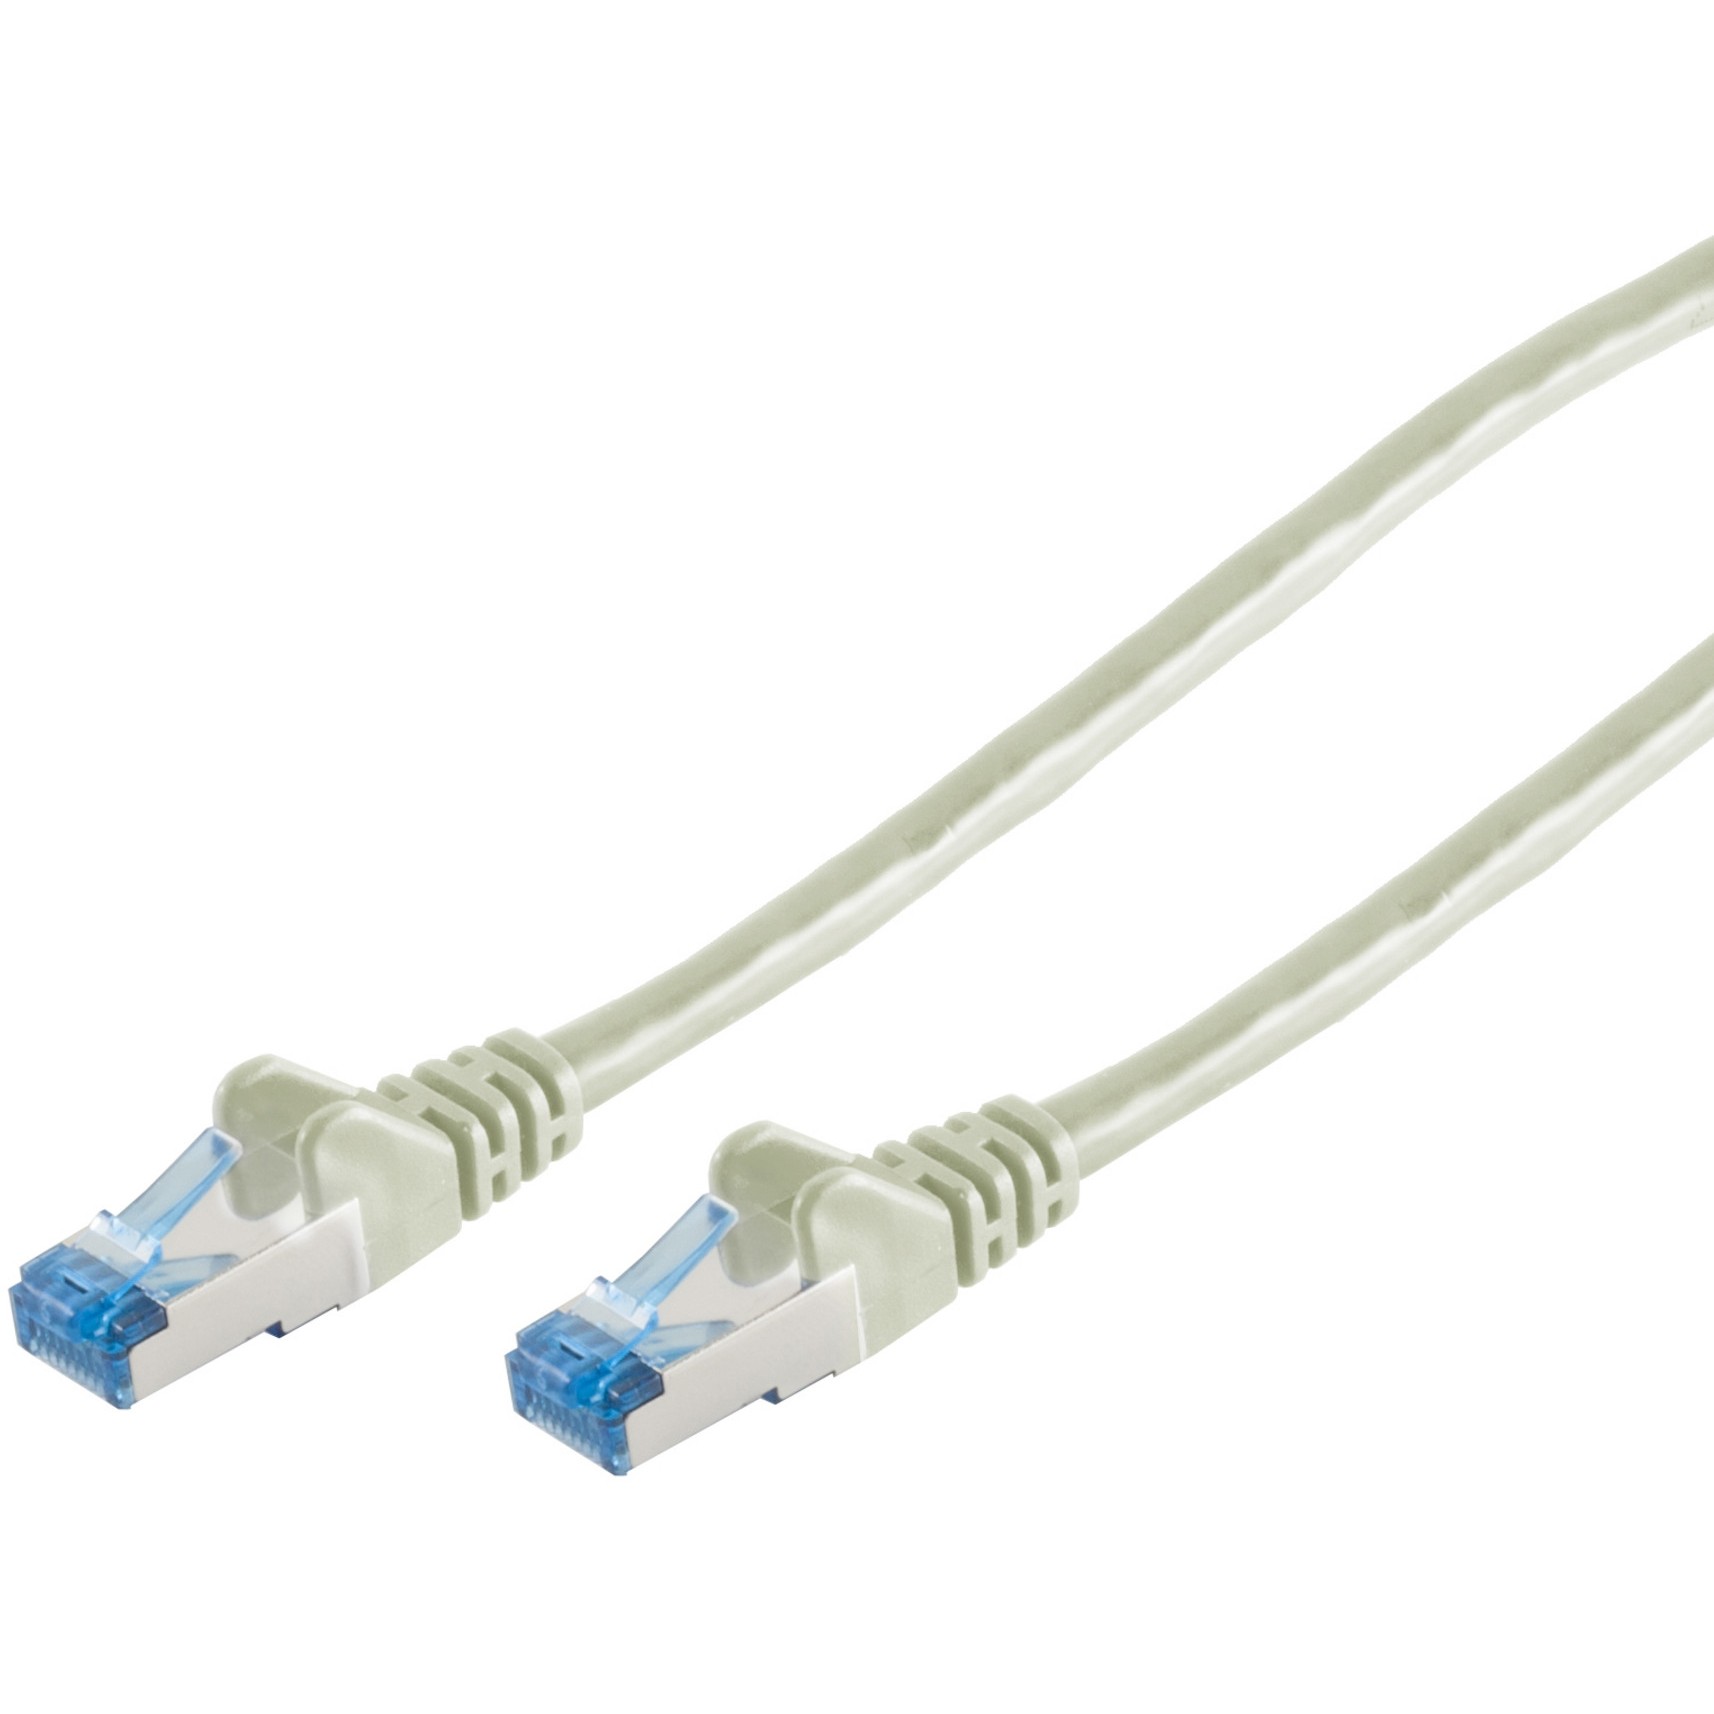 S-Conn 75711-0.25 networking cable - 75711-0.25